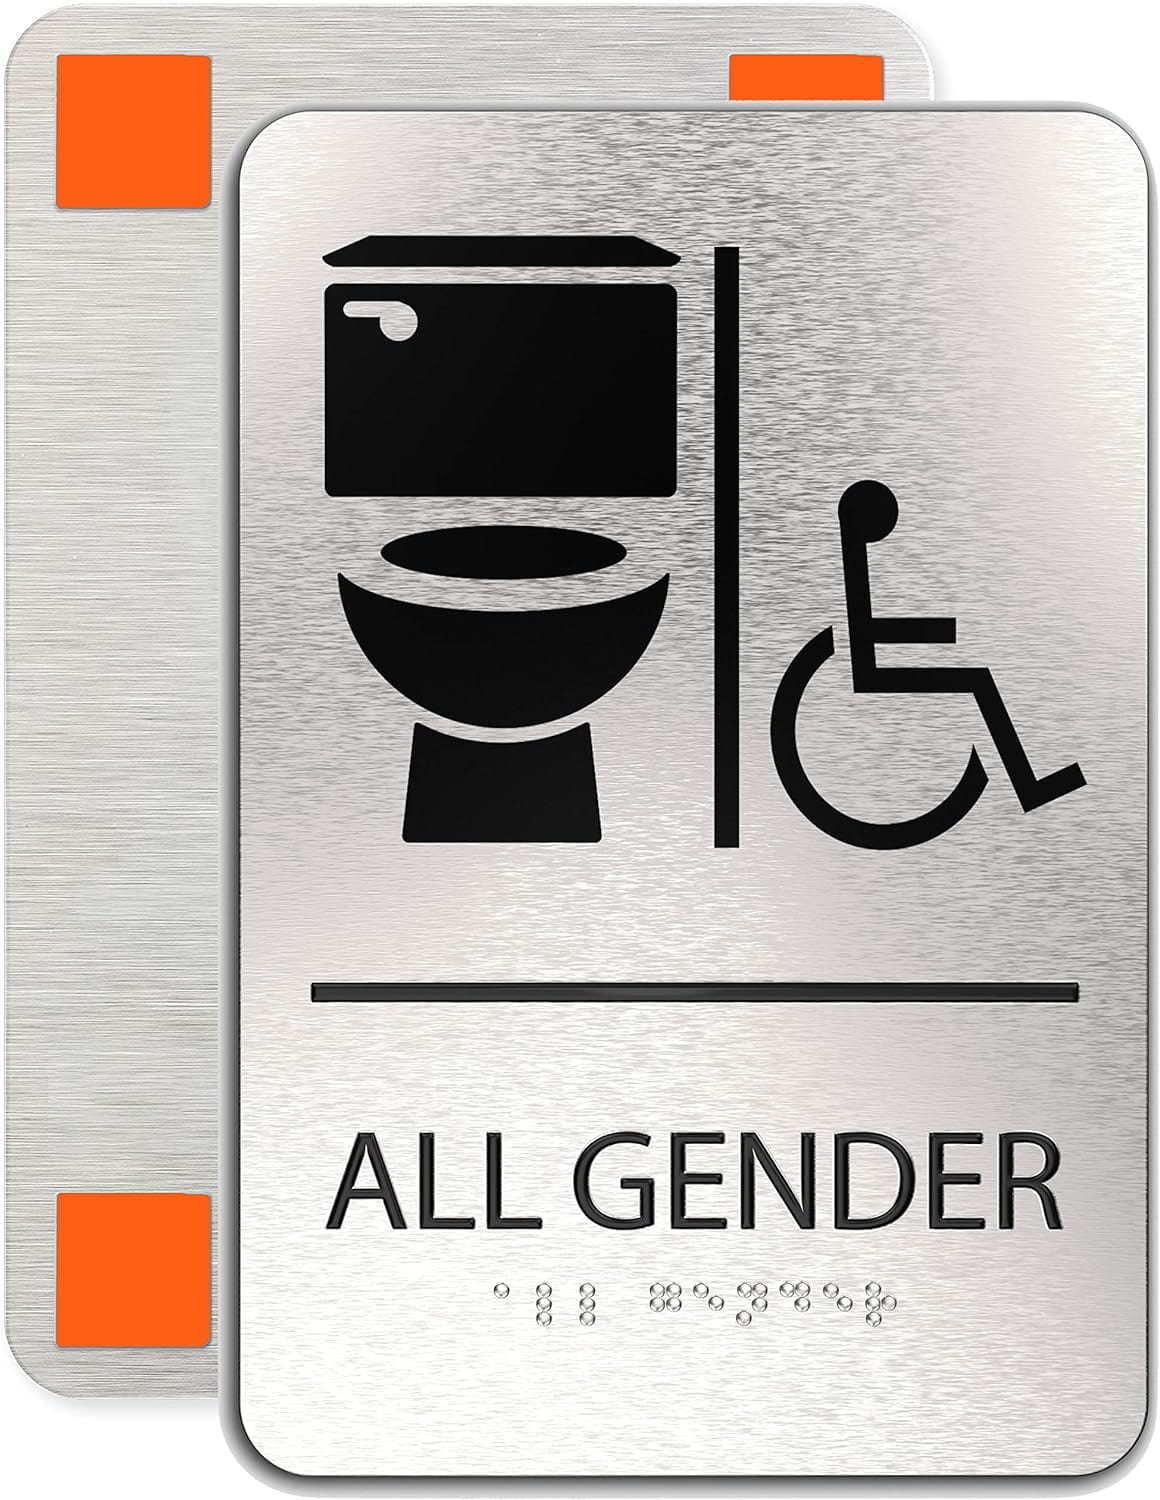 ADA Restroom Sign | Unisex Wheelchair Accessible Symbols | 6x9 inches